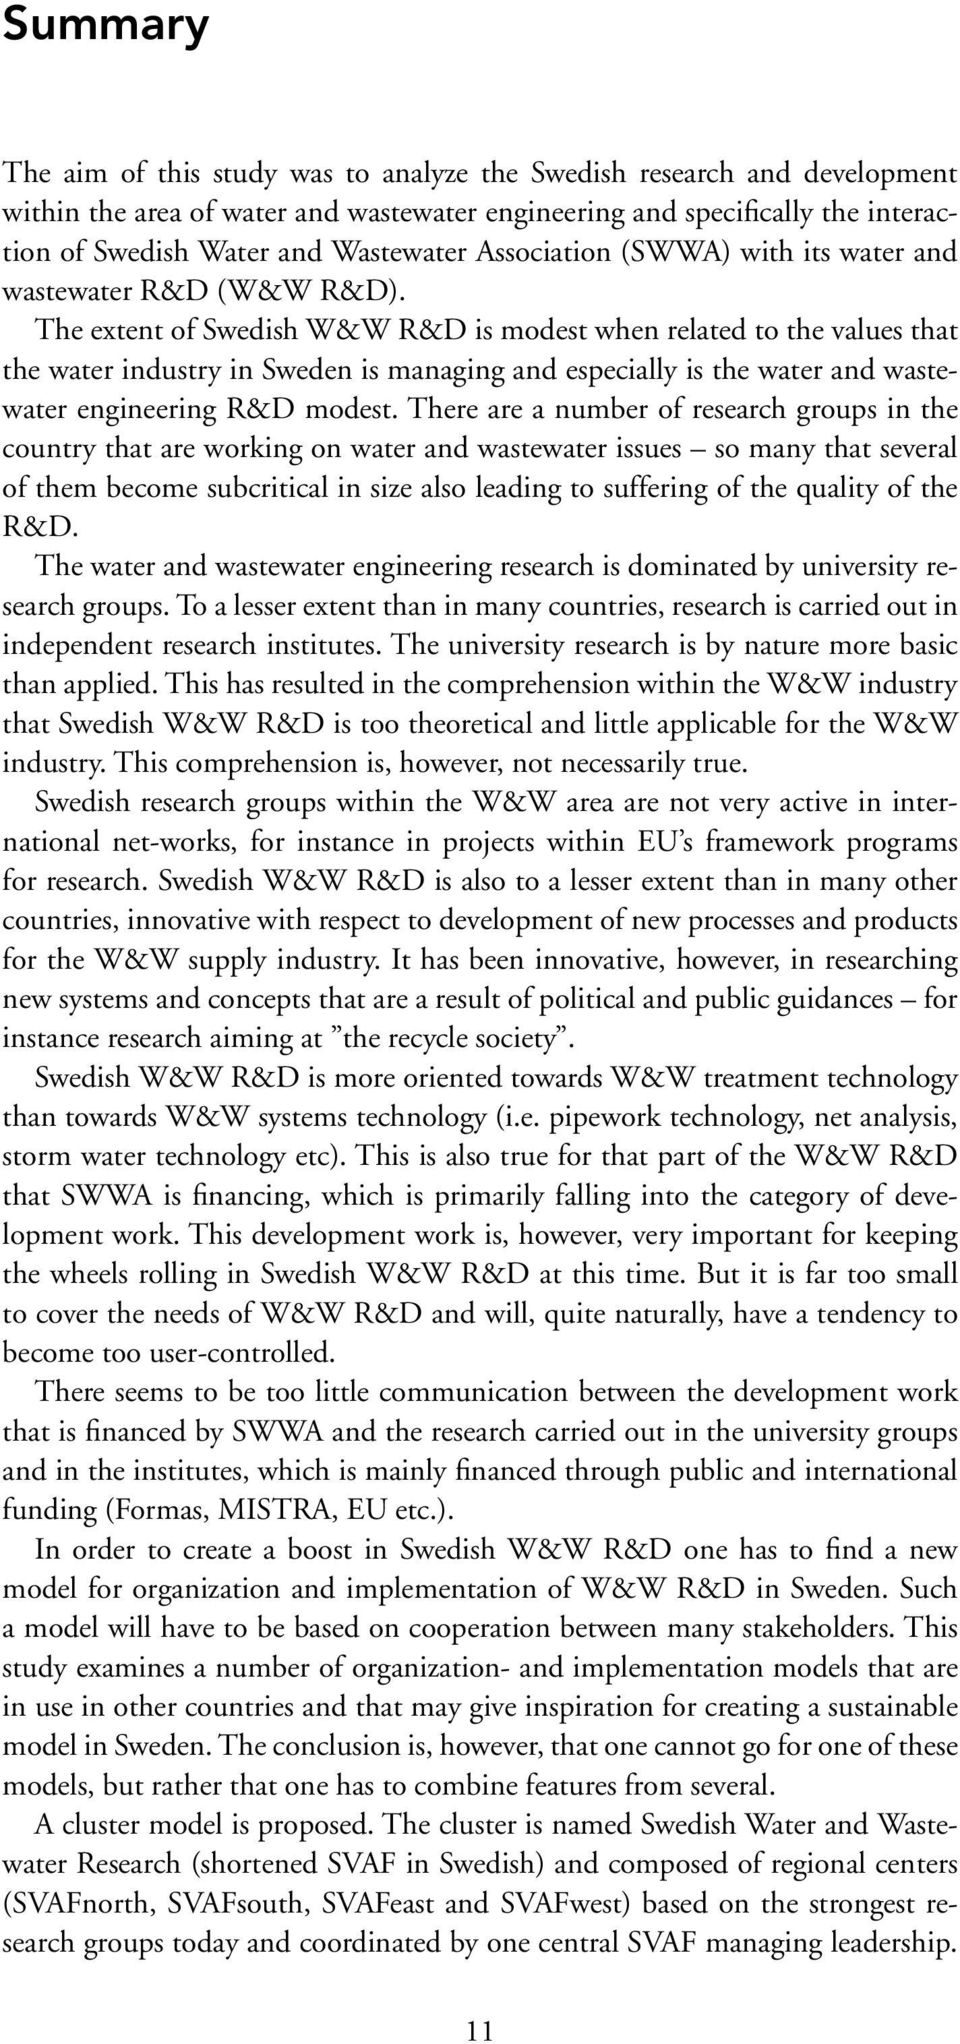 The extent of Swedish W&W R&D is modest when related to the values that the water industry in Sweden is managing and especially is the water and wastewater engineering R&D modest.